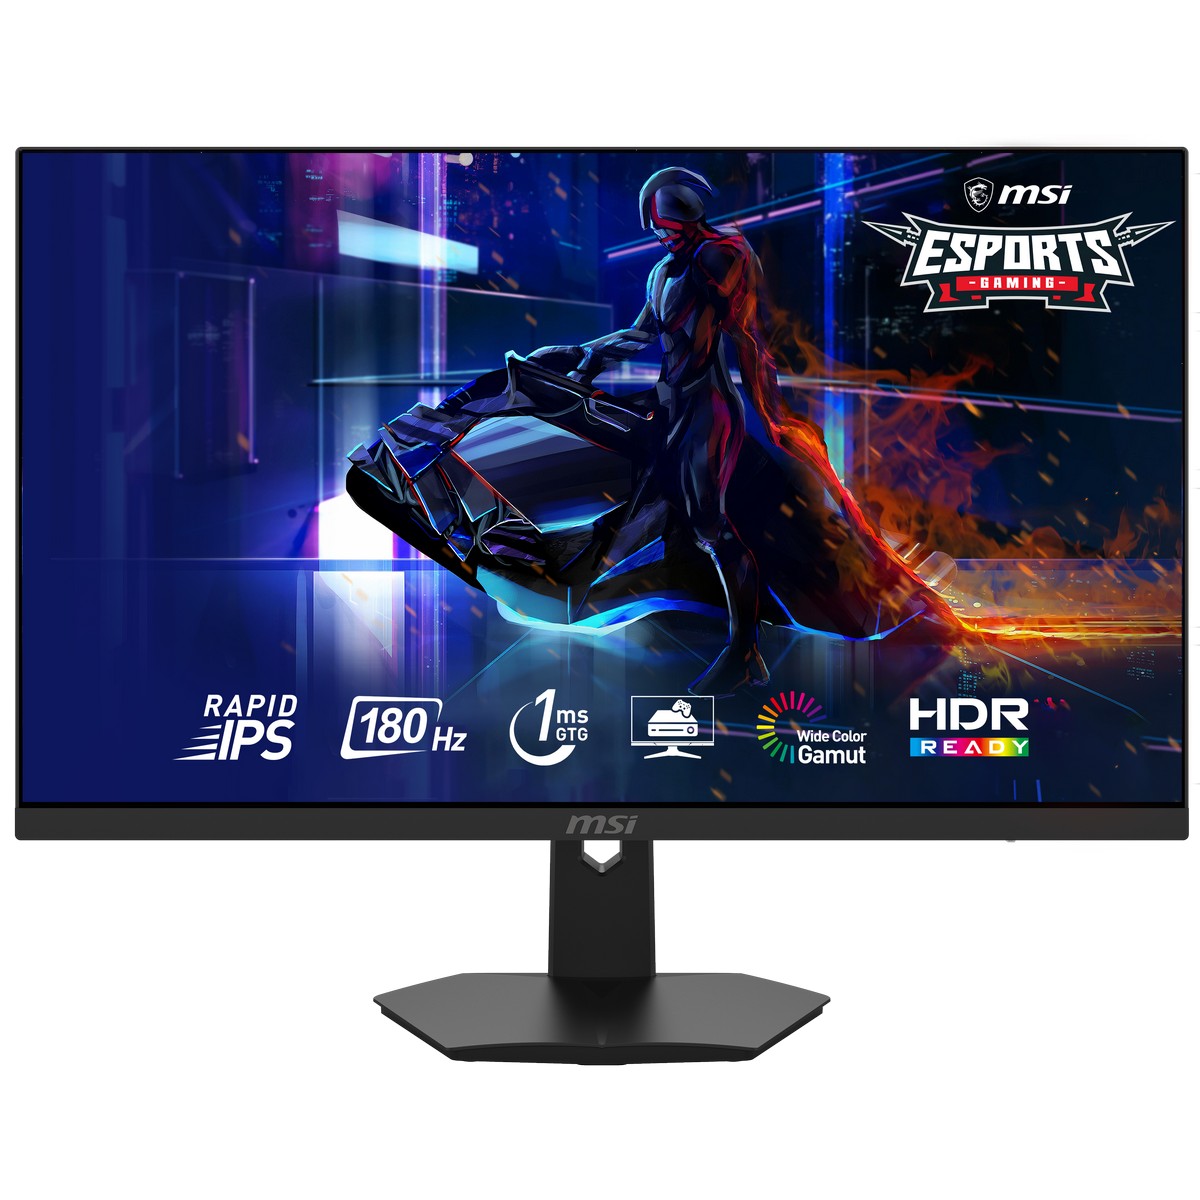 MSI 27" G274F 1920x1080 IPS 180Hz A-Sync Widescreen Gaming Monitor